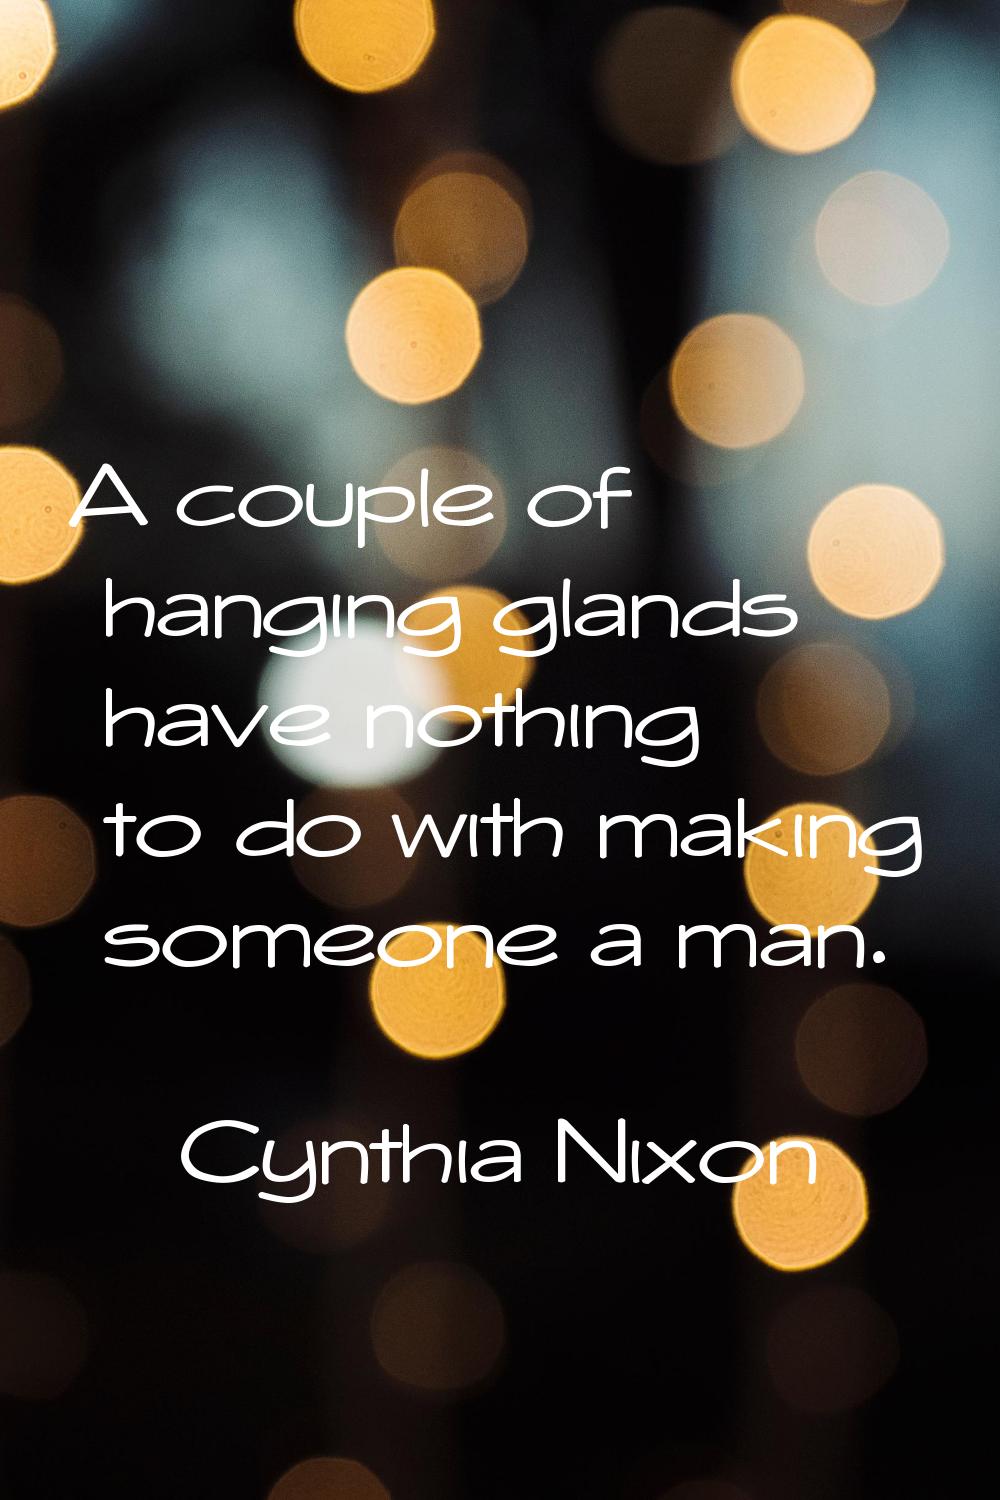 A couple of hanging glands have nothing to do with making someone a man.